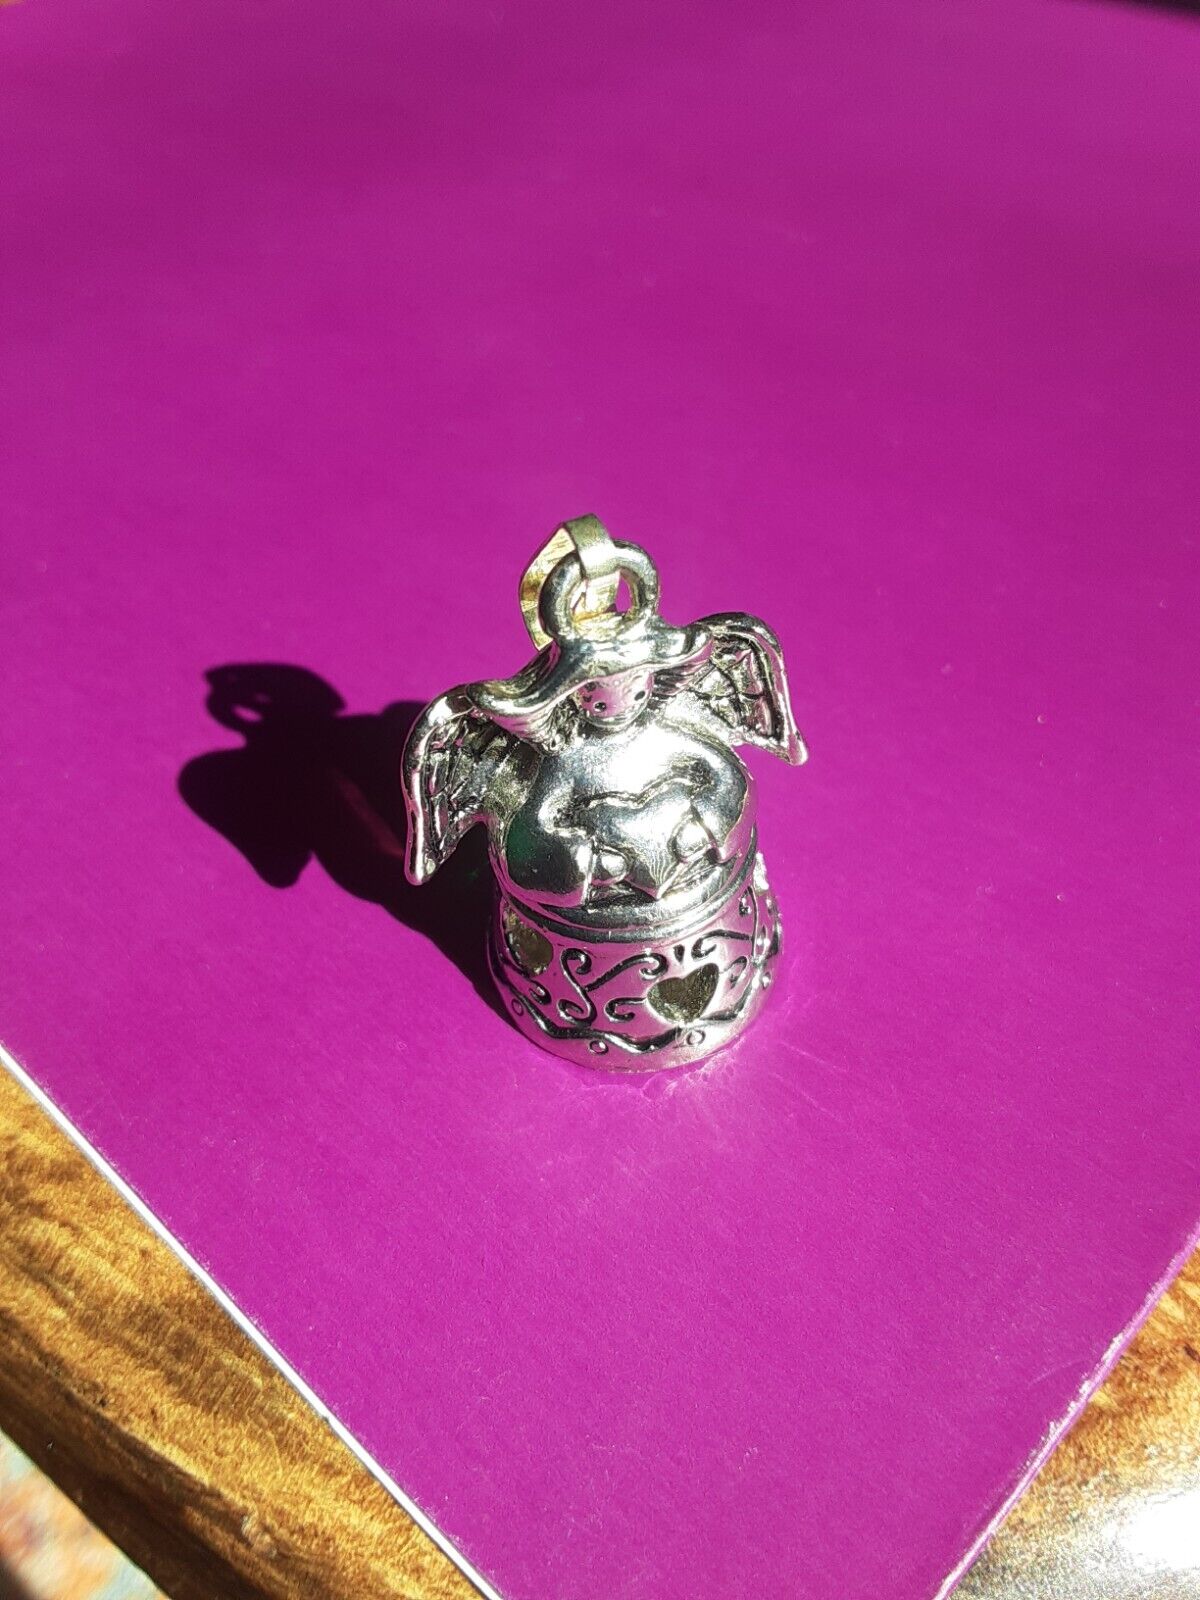 BEAUTIFUL ANGEL Silver Trinket Box and Pendant TINY BUT A WOW